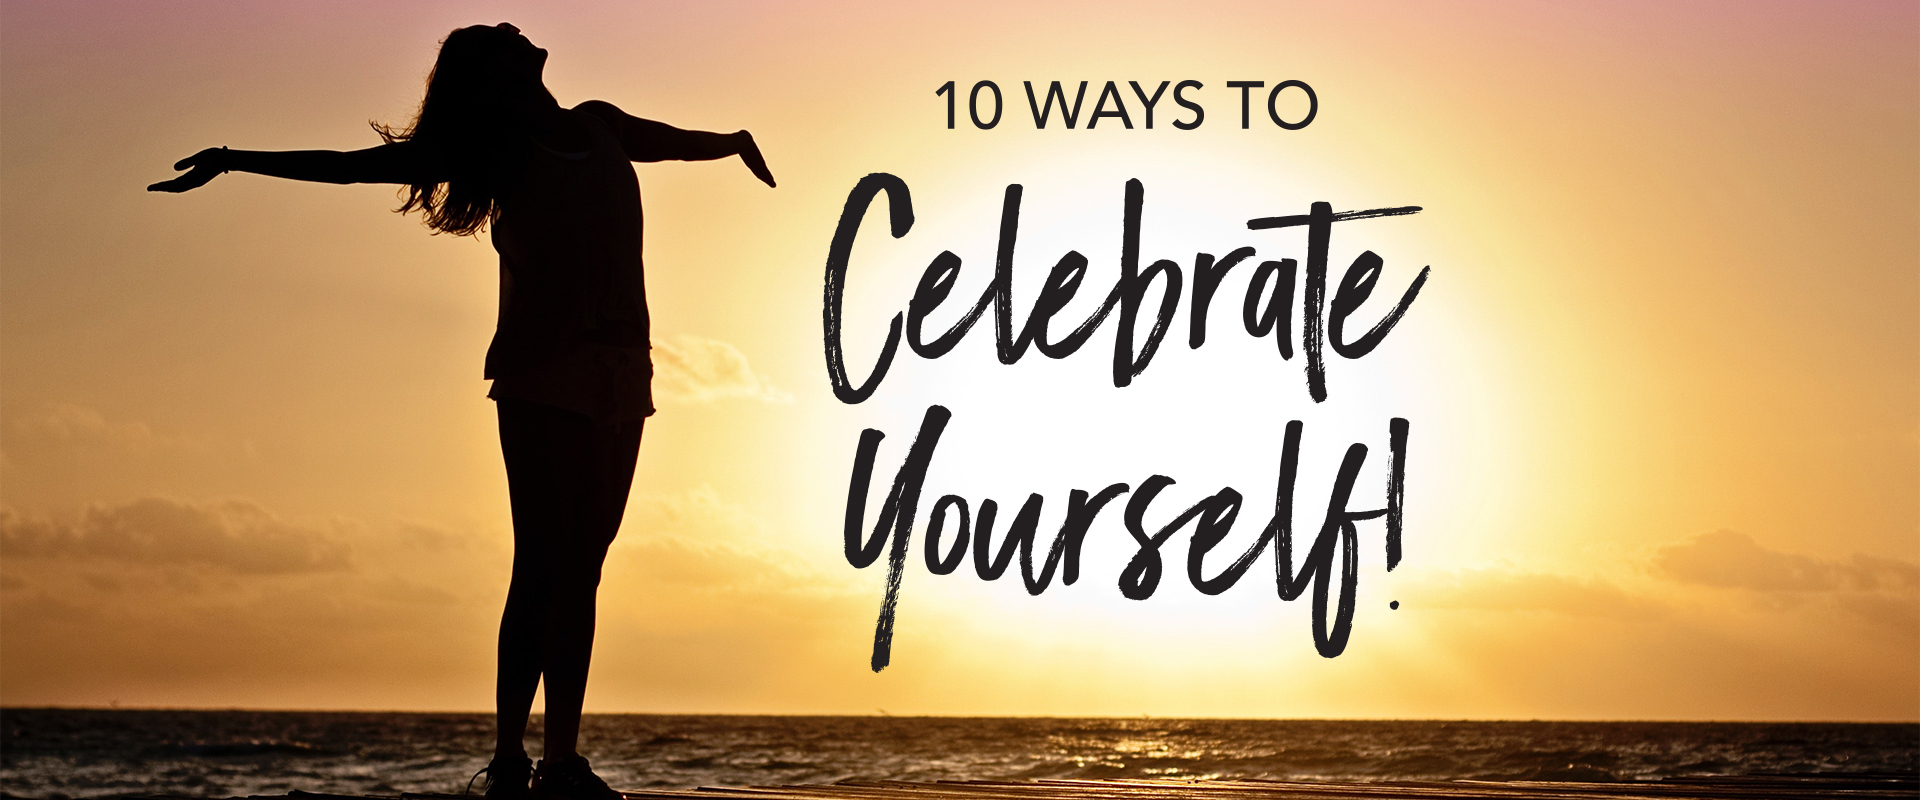 silhouette of a young woman with arms stretched out, with the ocean behind them at sunset with the title overlay "10 Ways To Celebrate Yourself!"